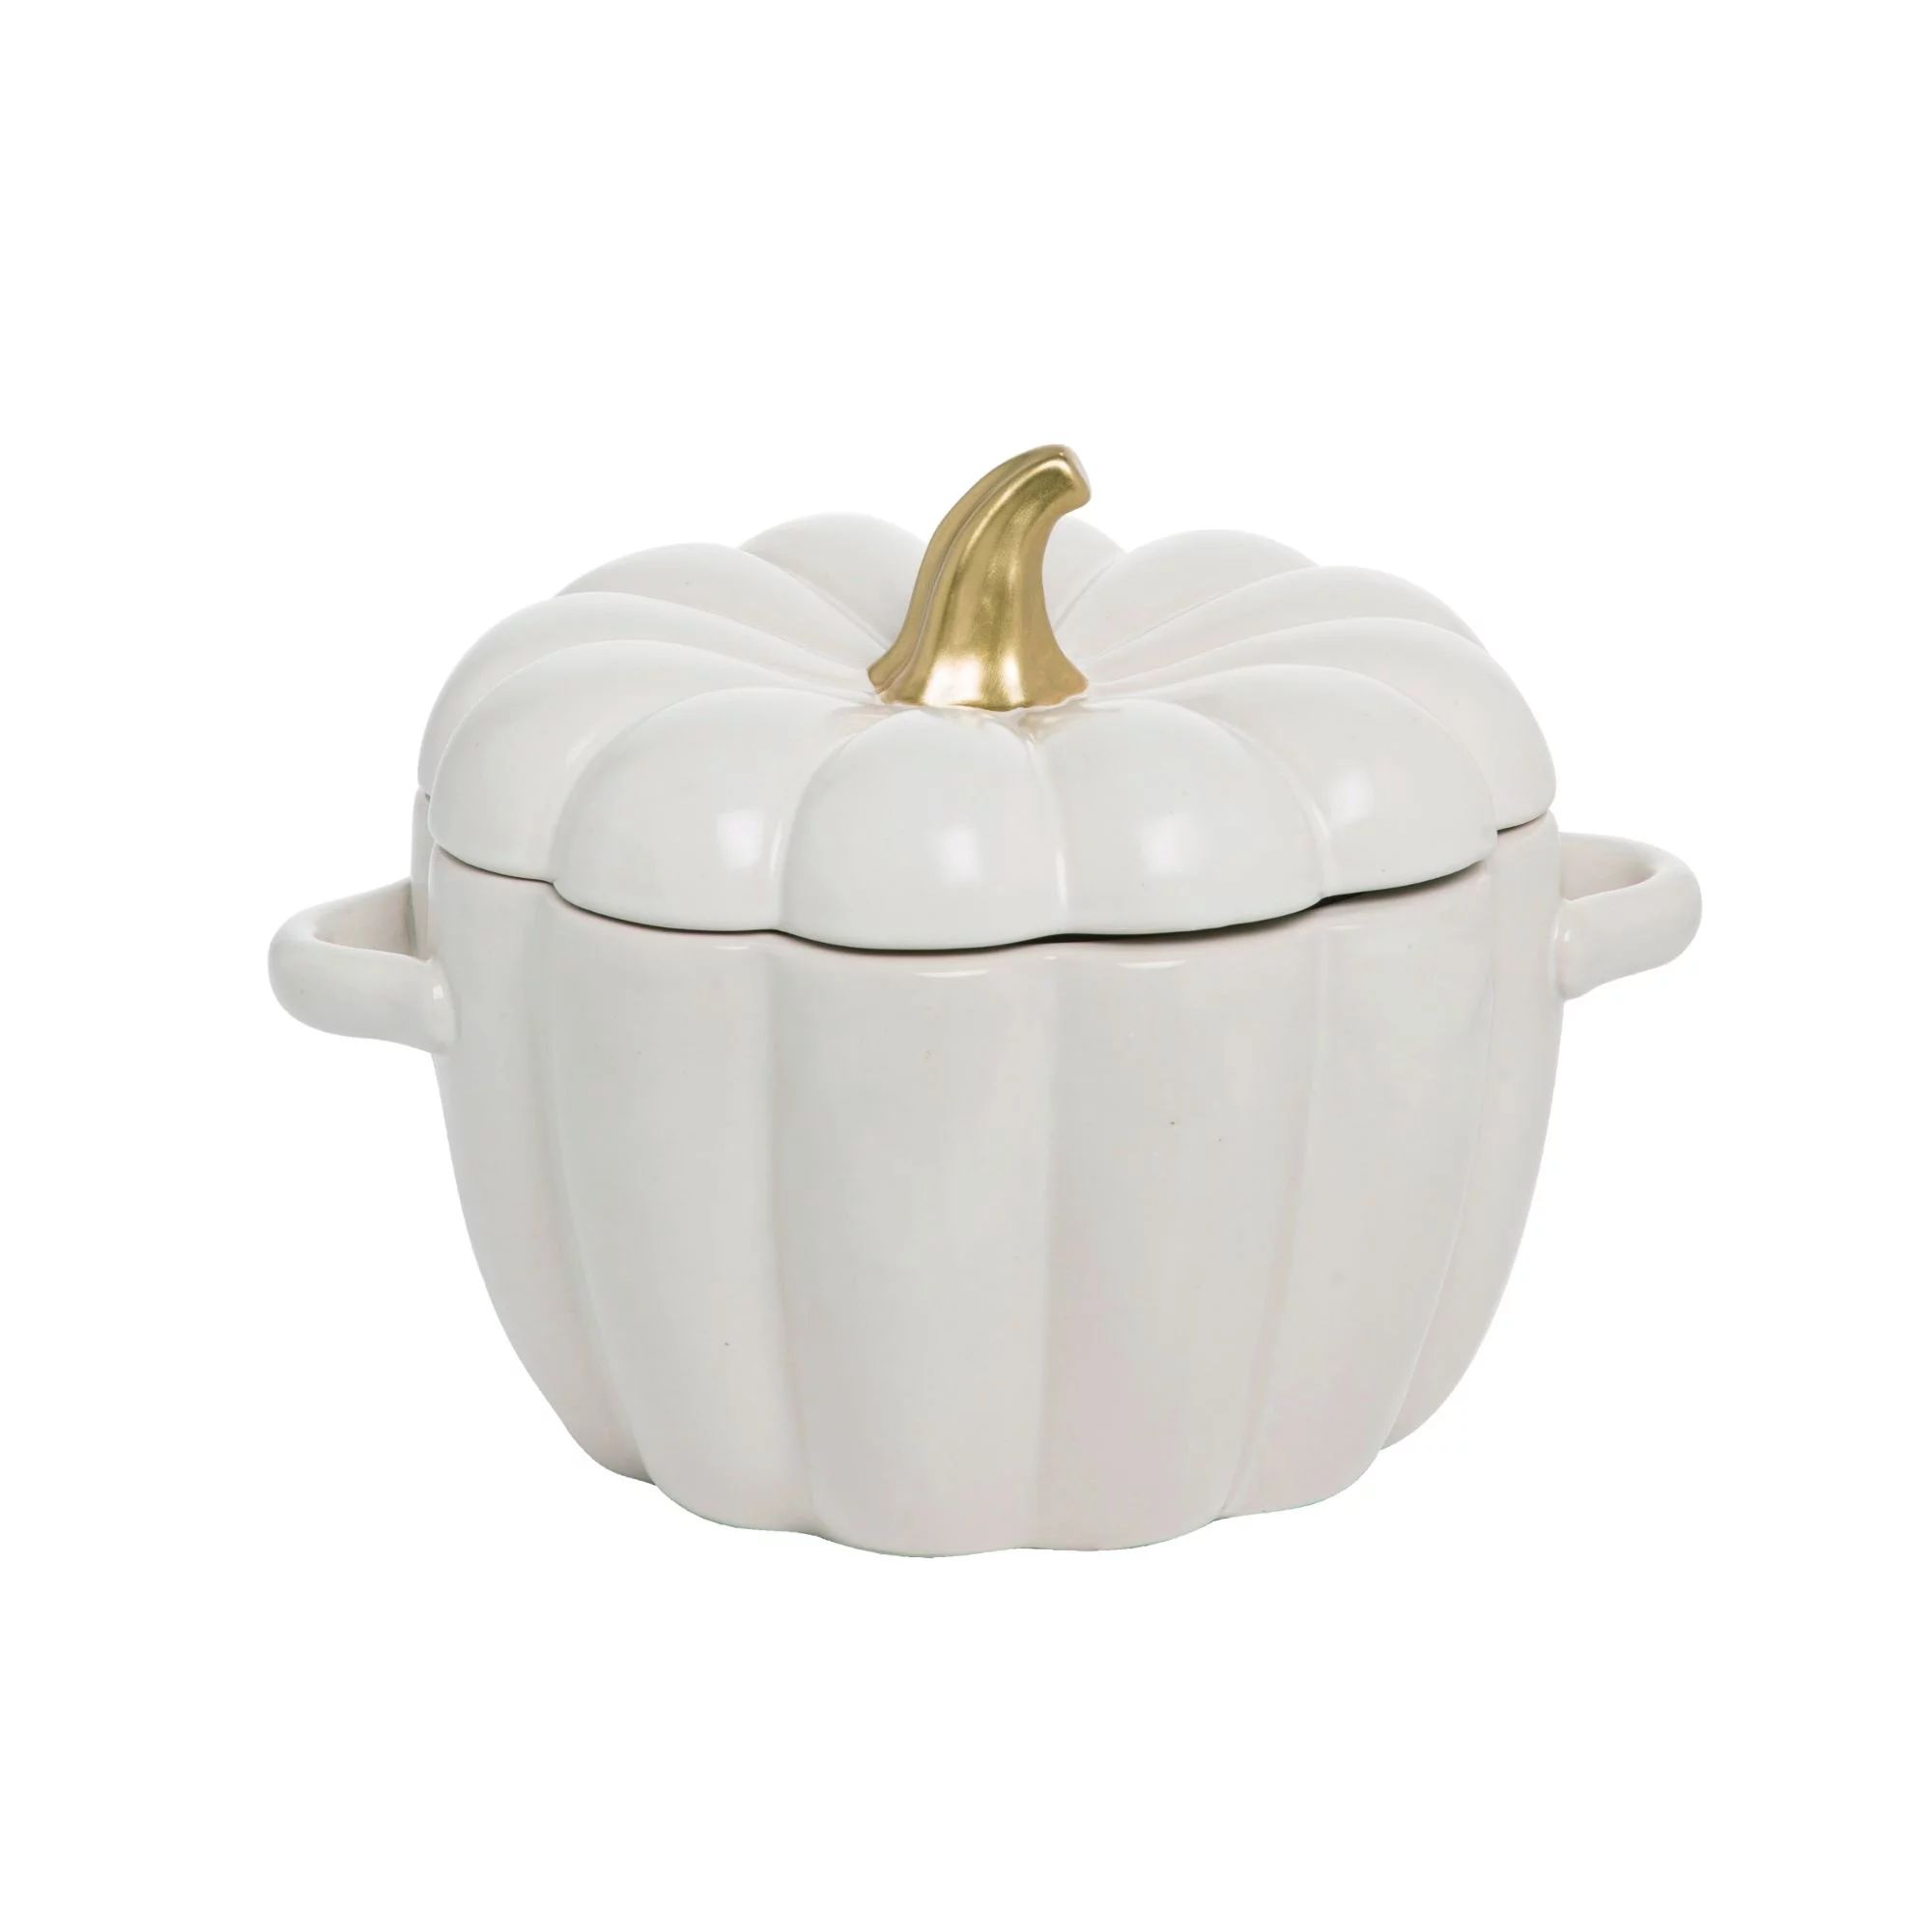 12" Gold and White Pumpkin with Stem Bowl Thanksgiving Tabletop Decor | Walmart (US)